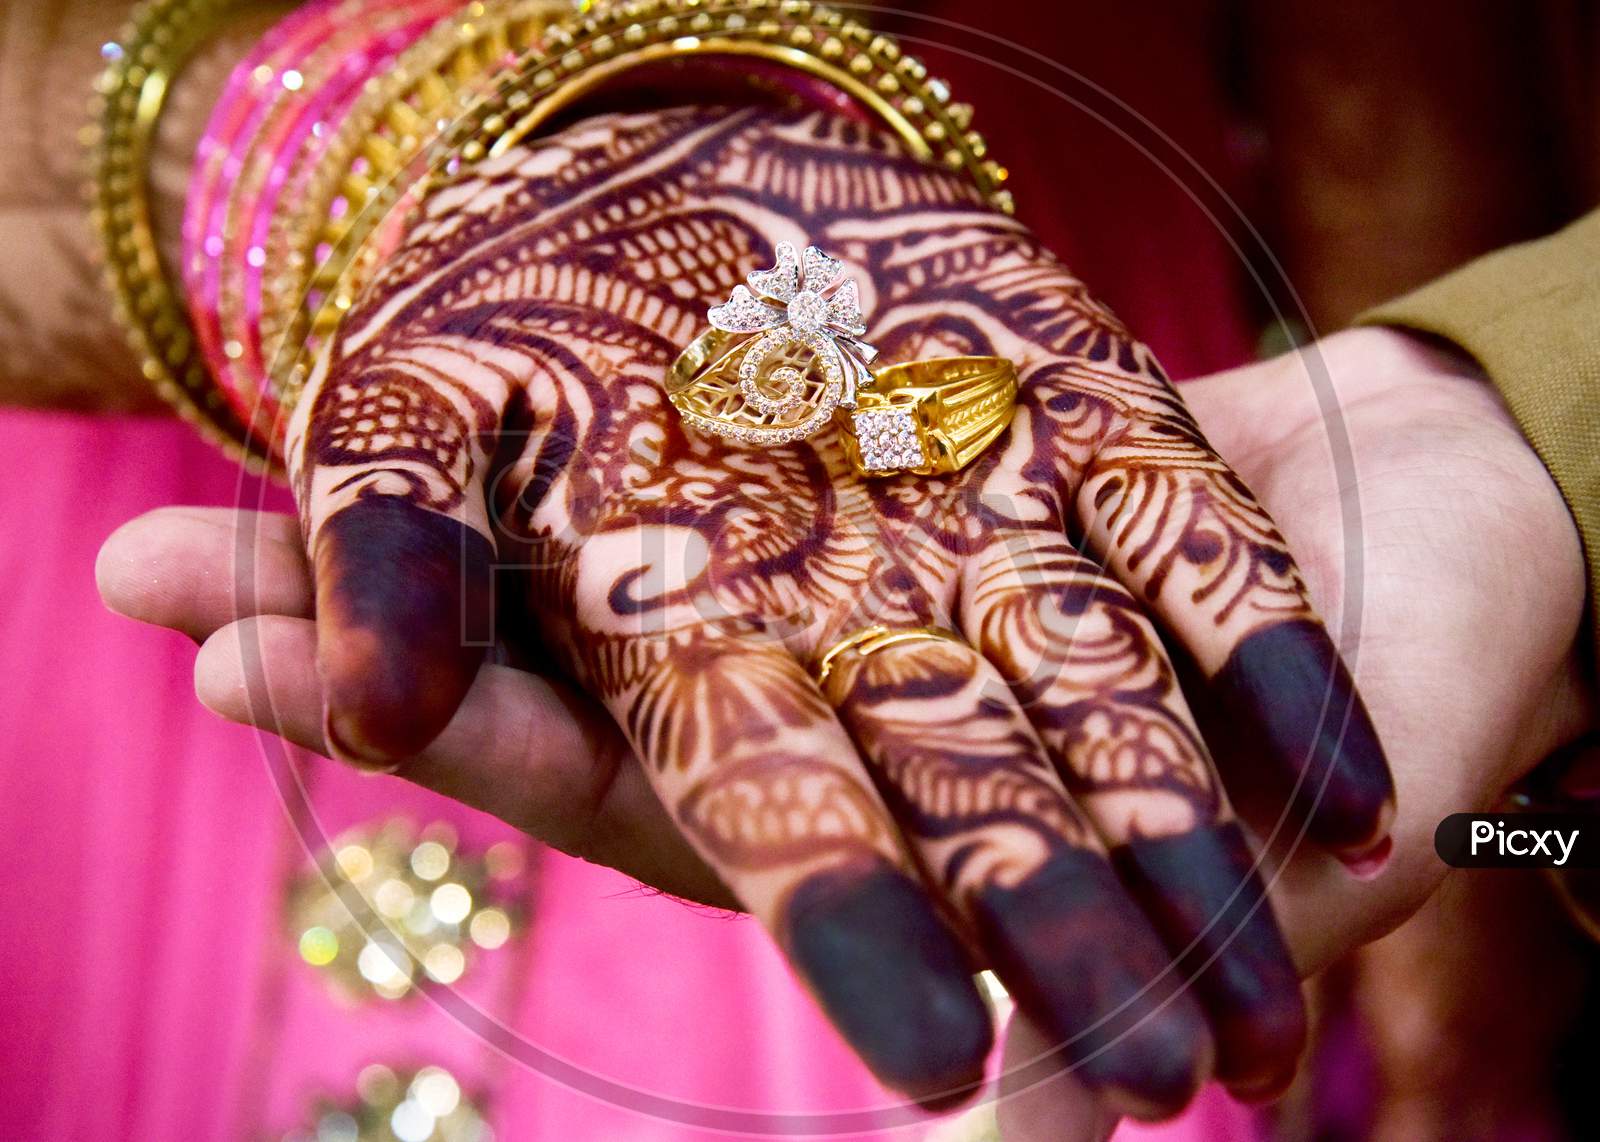 Gold Wedding Rings Are On The Bride'S Hand